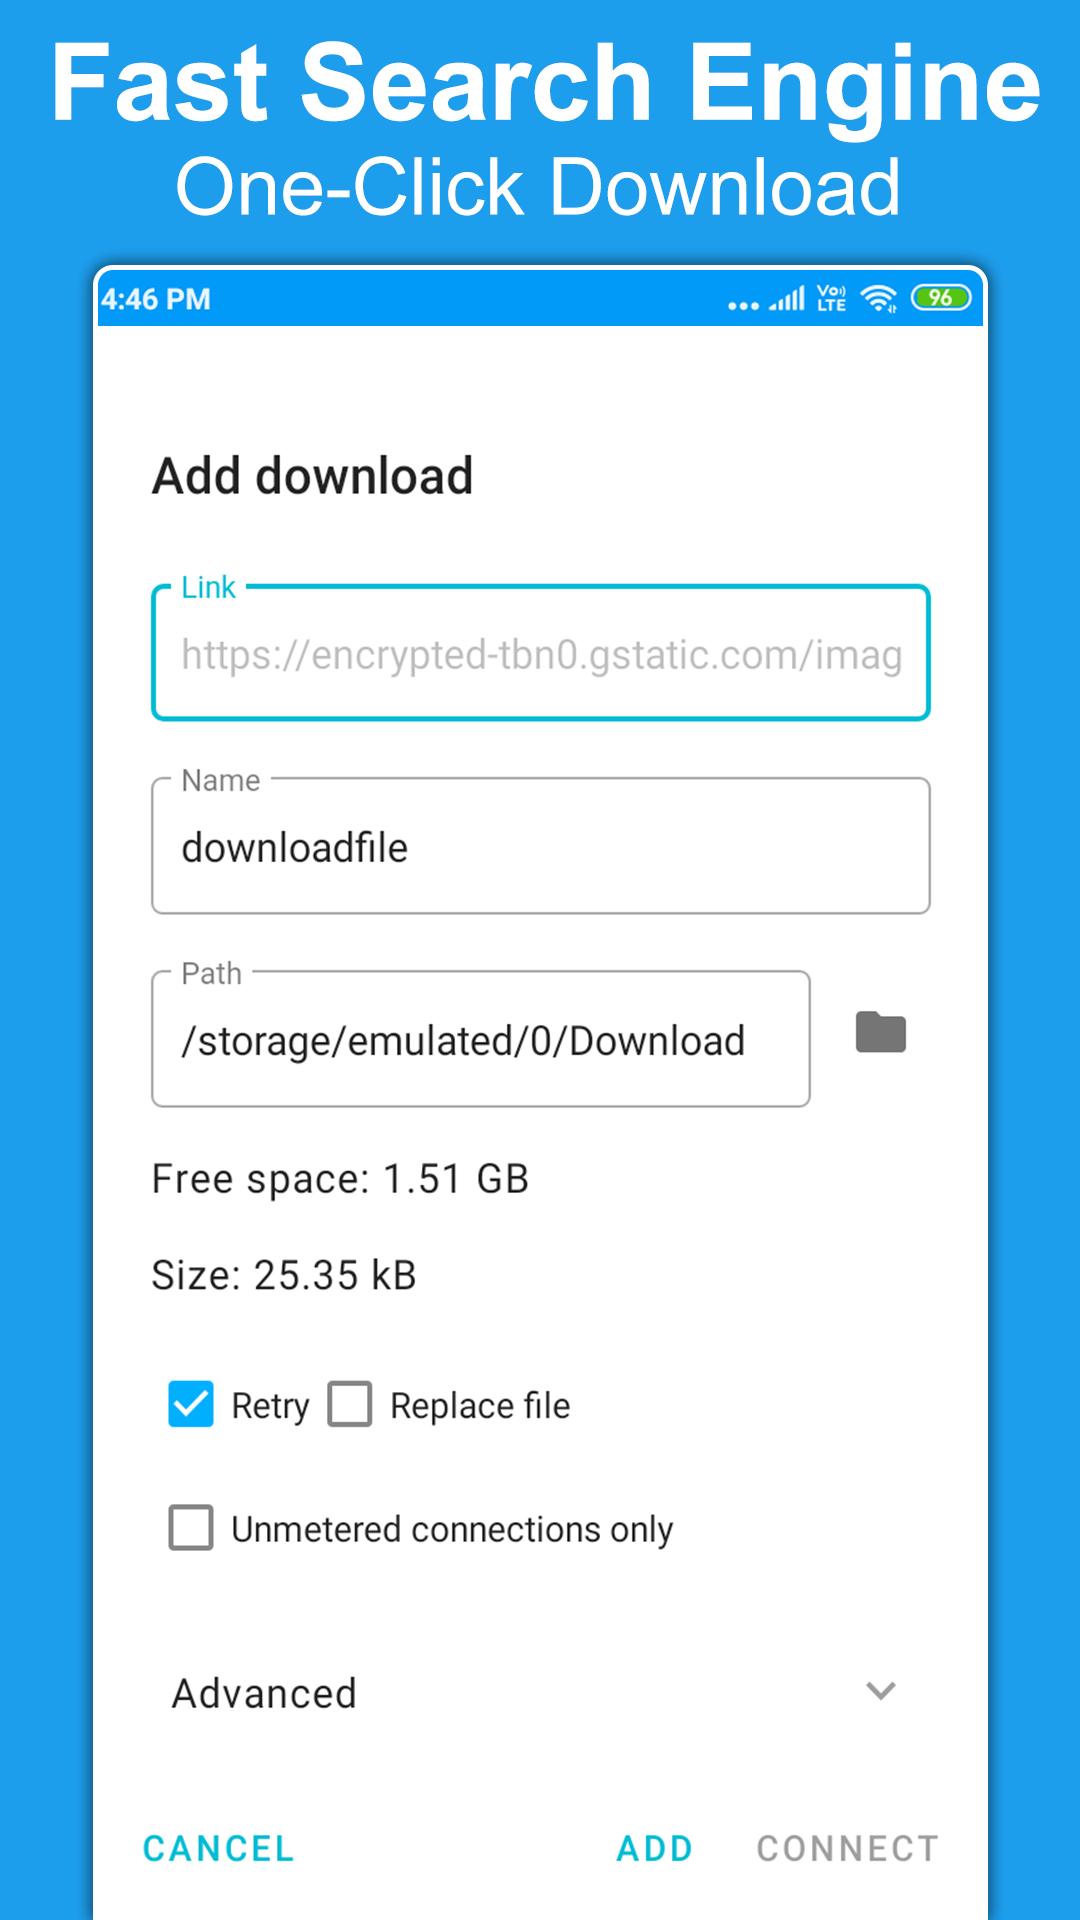 Idm Download Manager For Android Apk Download